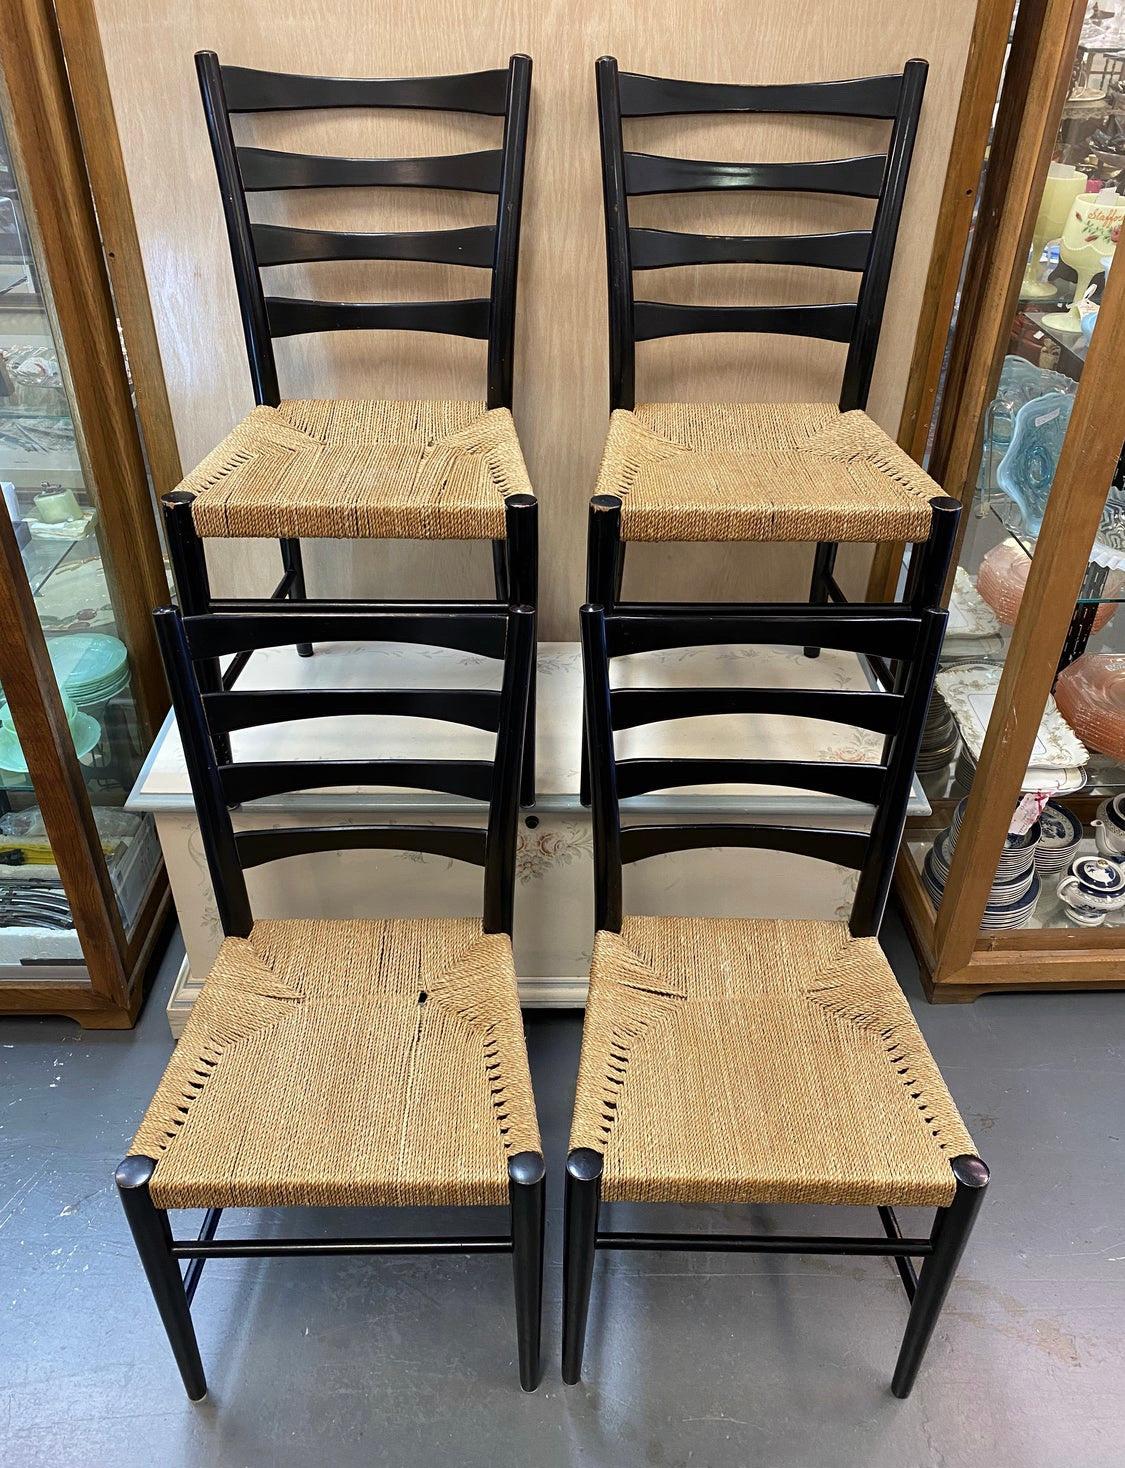 Beautiful vintage set of 4 Mid-Century Modern Scandinavian black lacquered, rope woven dining chairs made in Sweden by Royal Sweden. These ladder-back chairs are gorgeous in all its Scandinavian simplicity. fantastic set, don’t miss out. 


The